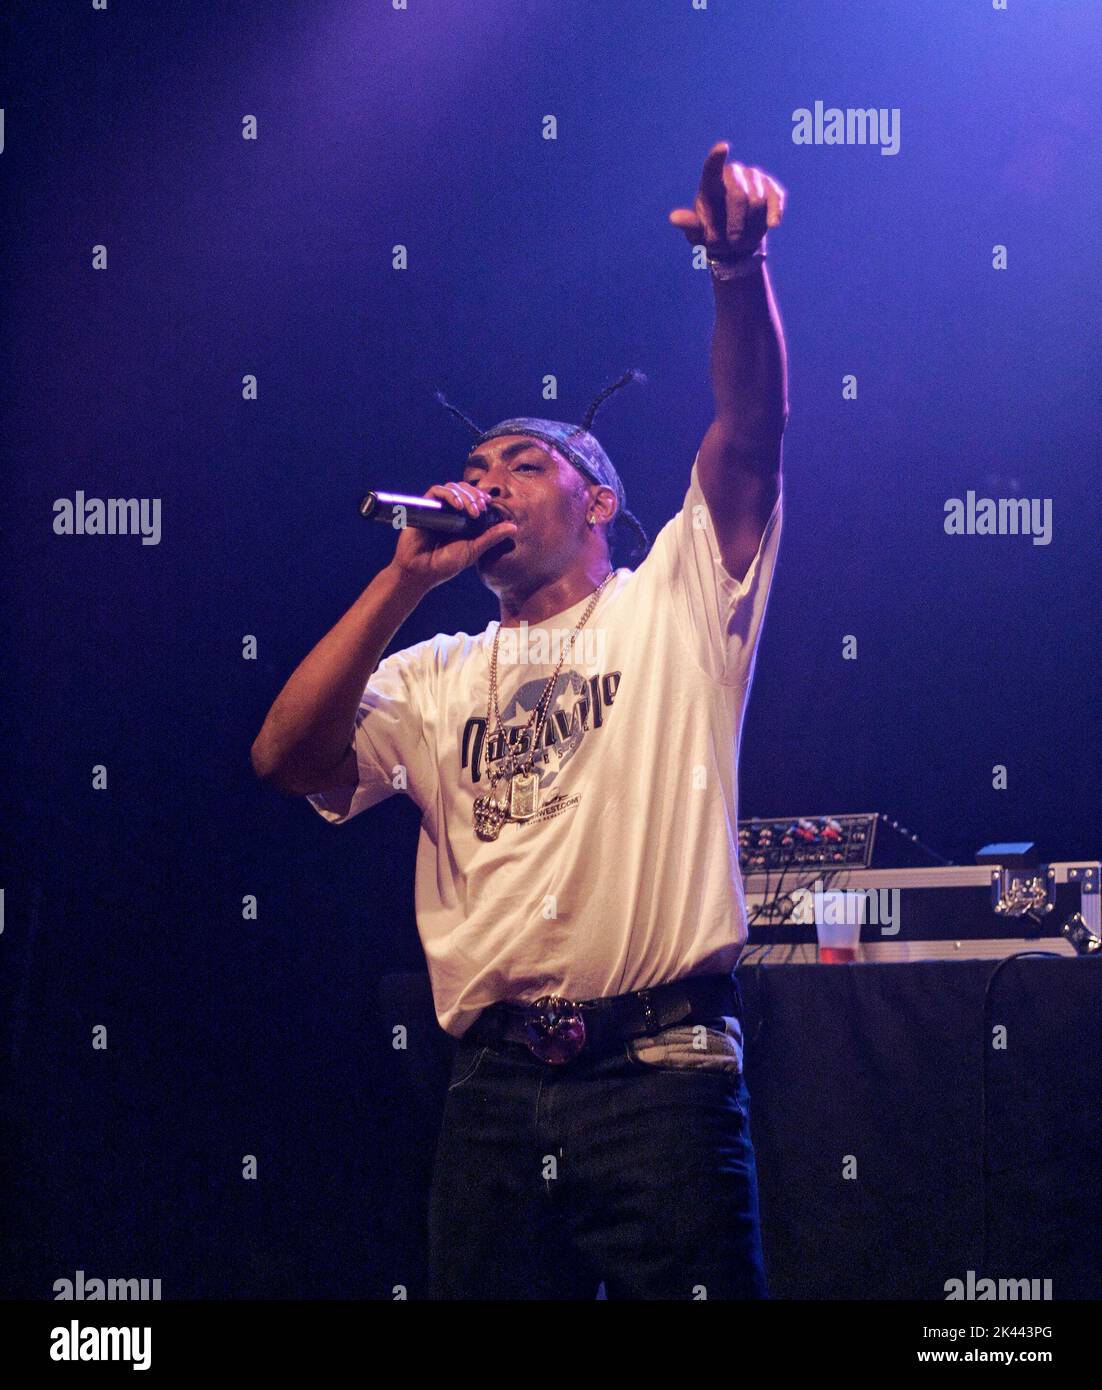 Grammy Award-winning rapper Coolio performs on Monday, Oct. 5, 2009 at club 527 Main in Murfreesboro, Rutherford County, TN, USA. Born Artis Leon Ivey Jr., Coolio is perhaps best known for his mid-1990s hits 'Gangsta's Paradise' and 'Fantastic Voyage,' winning the 1996 Grammy for Best Rap Solo Performance and 1996 MTV Video Music Award for 'Gangsta's Paradise' and being crowned Favorite Rap/Hip-Hop Artist at the 1996 American Music Awards. (Apex MediaWire Photo by Billy Suratt) Stock Photo